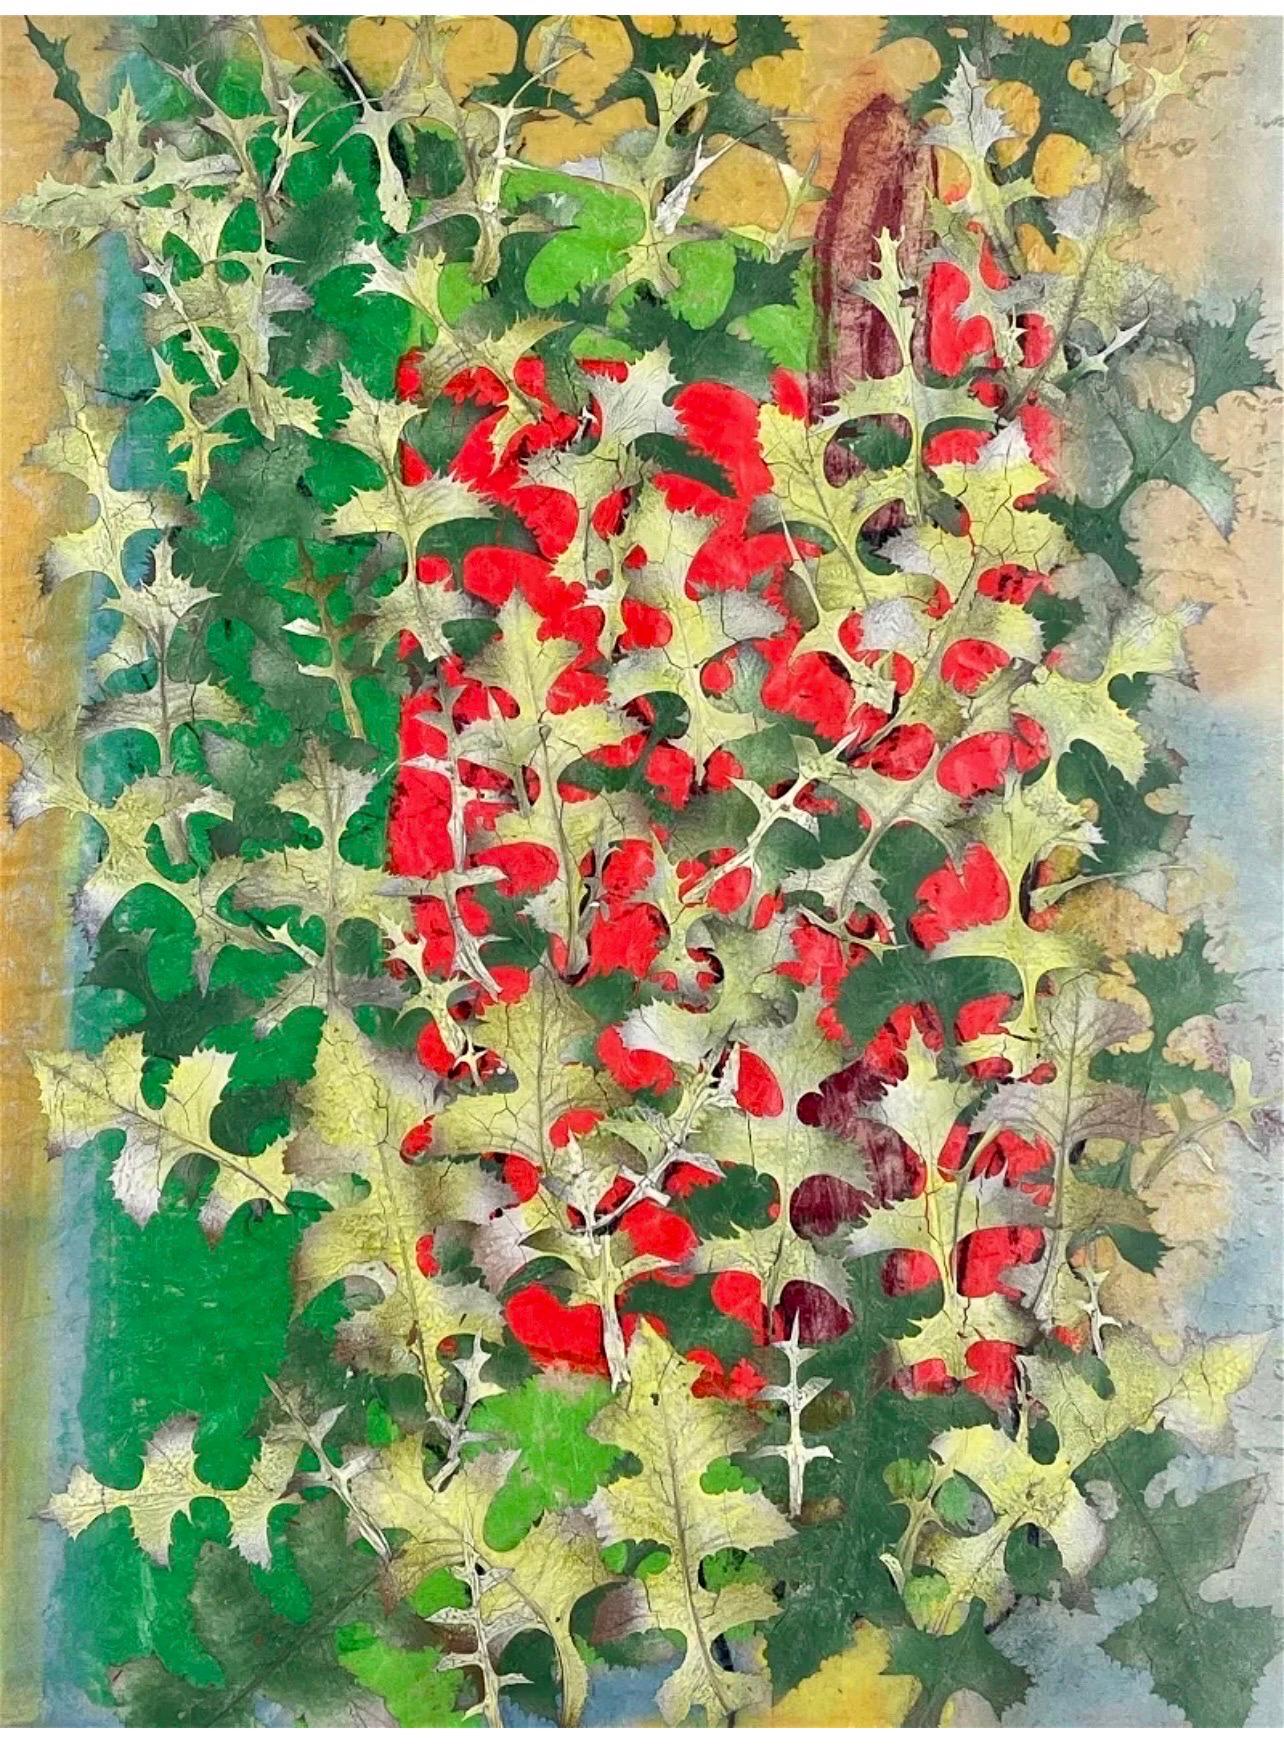 Boston Modernist Painting Floral Foliage Collage German Expressionist Karl Zerbe For Sale 8